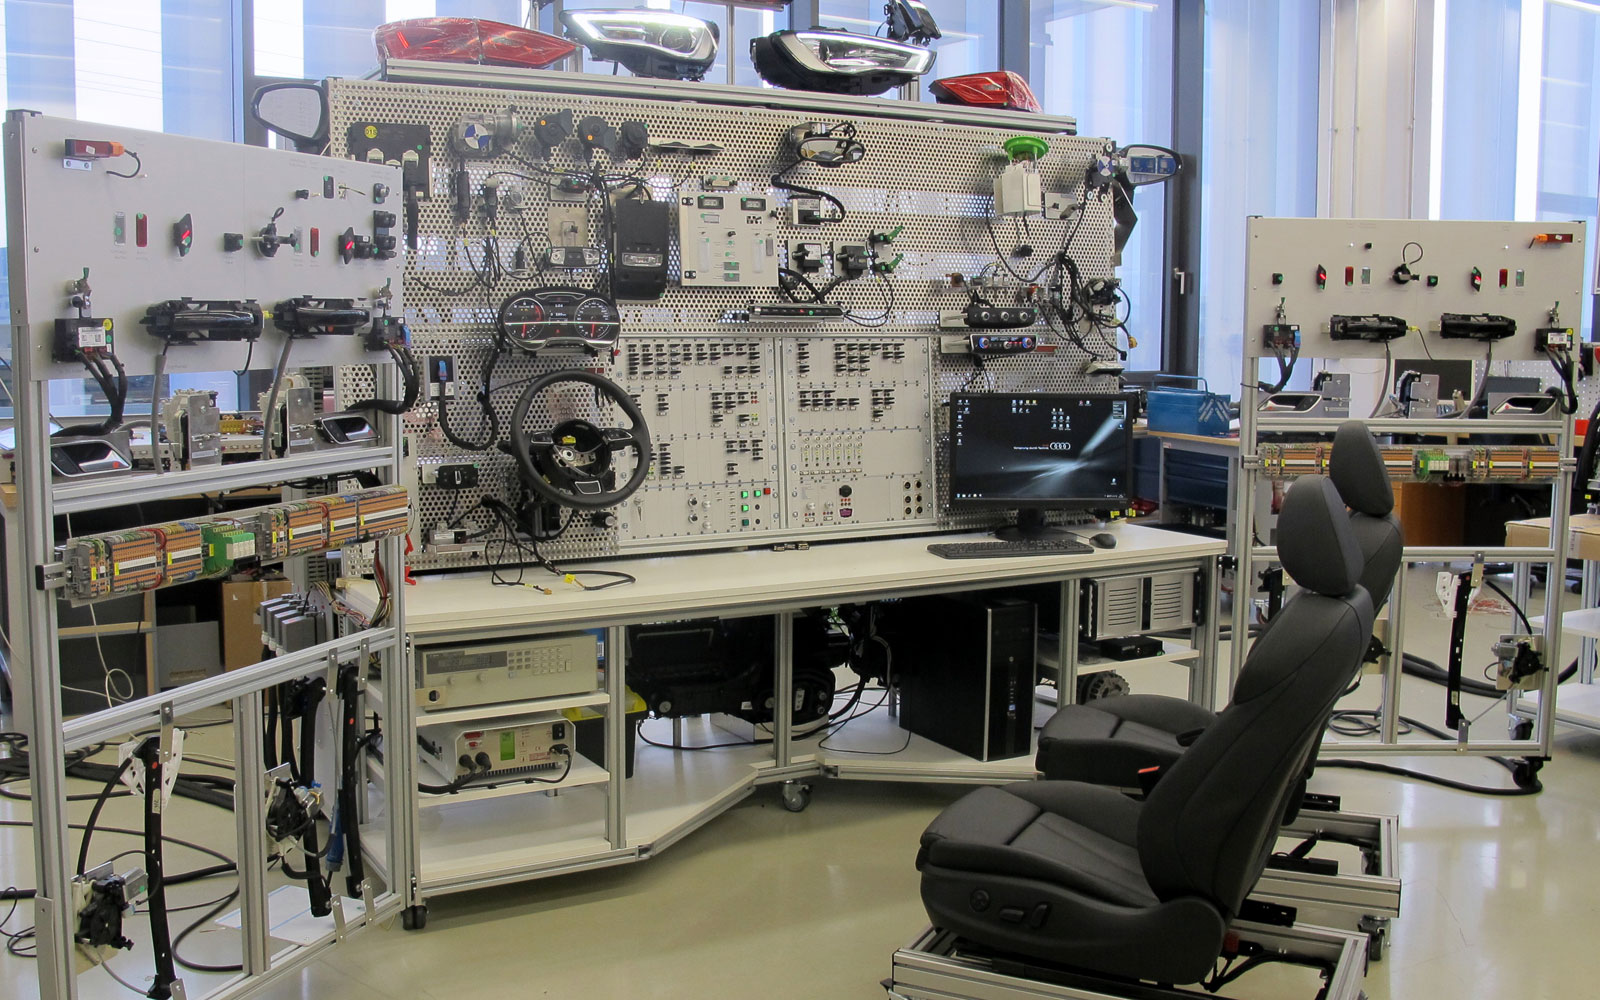 Reproduction of a complete vehicle electrical system in the test laboratory: wide-range current measurements and ECU tests (source: BFFT Gesellschaft für Fahrzeugtechnik mbH